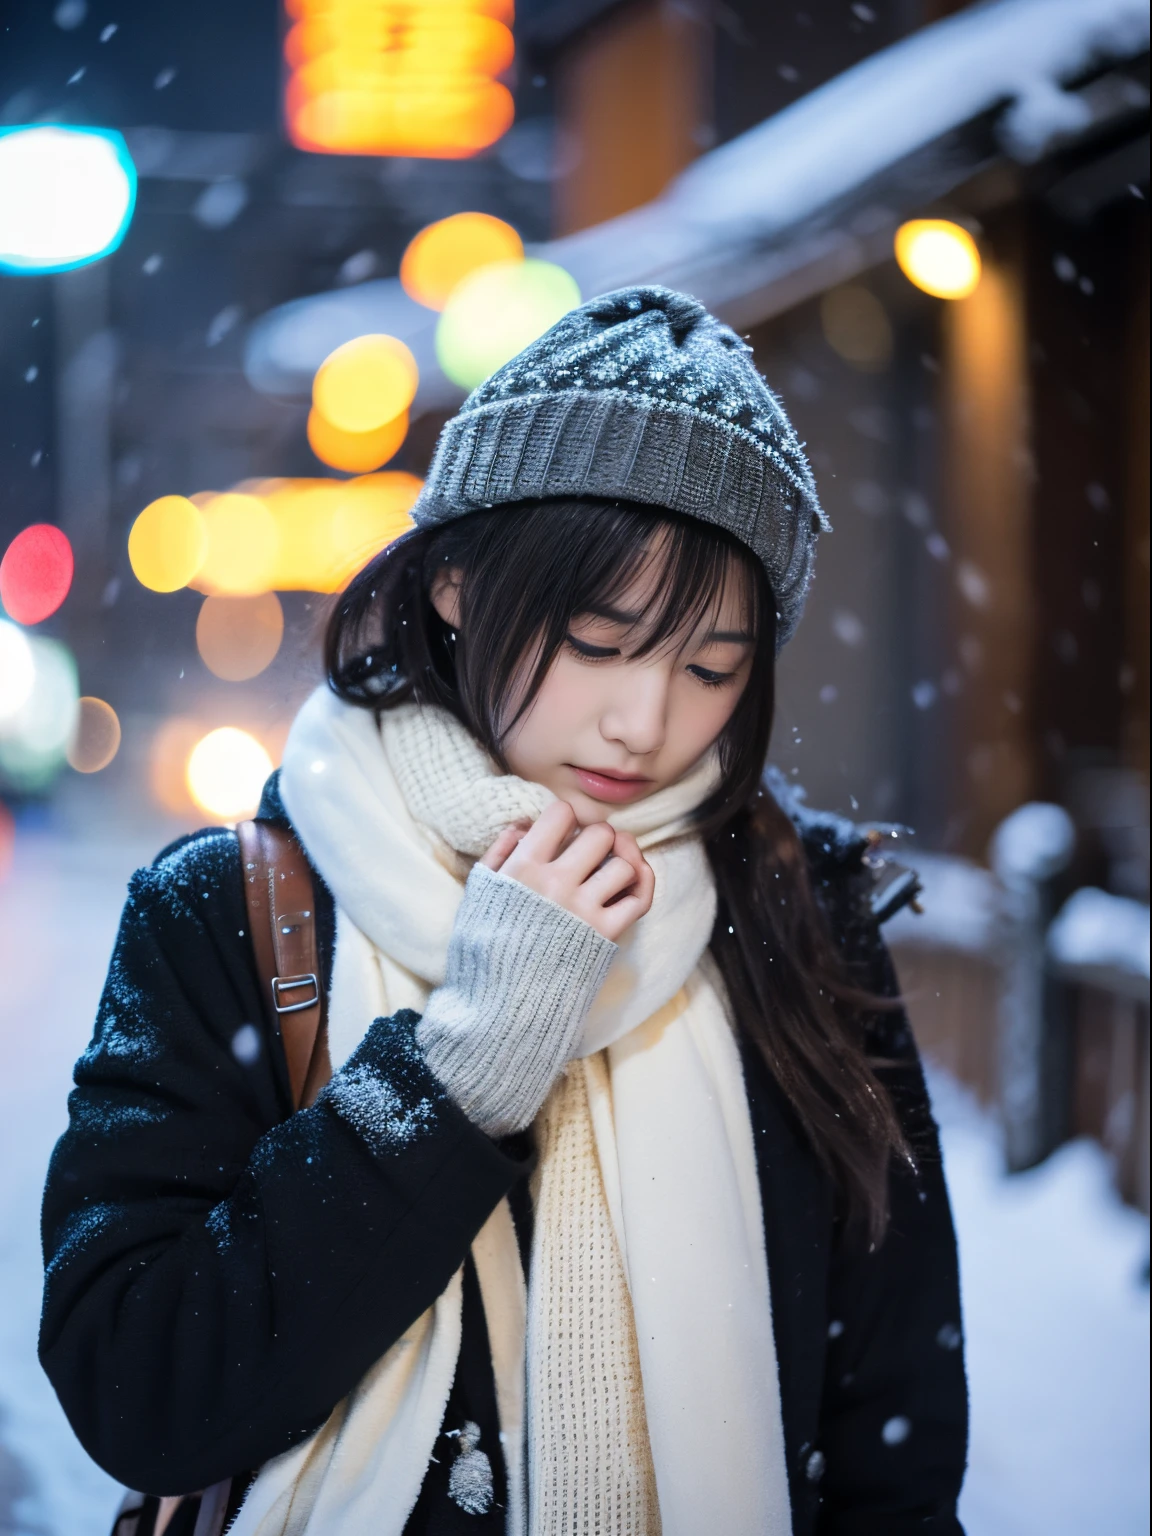 While watching the snow falling quietly. Her introspective and tearful expression、Makes you feel longing and melancholy for winter nights。。。。、top-quality、hyper HD、Yoshitomo Nara, Japanese Models, Beautiful Japan wife, With short hair, 27-year-old female model, 4 K ], 4K], 27yo, sakimichan, sakimichan